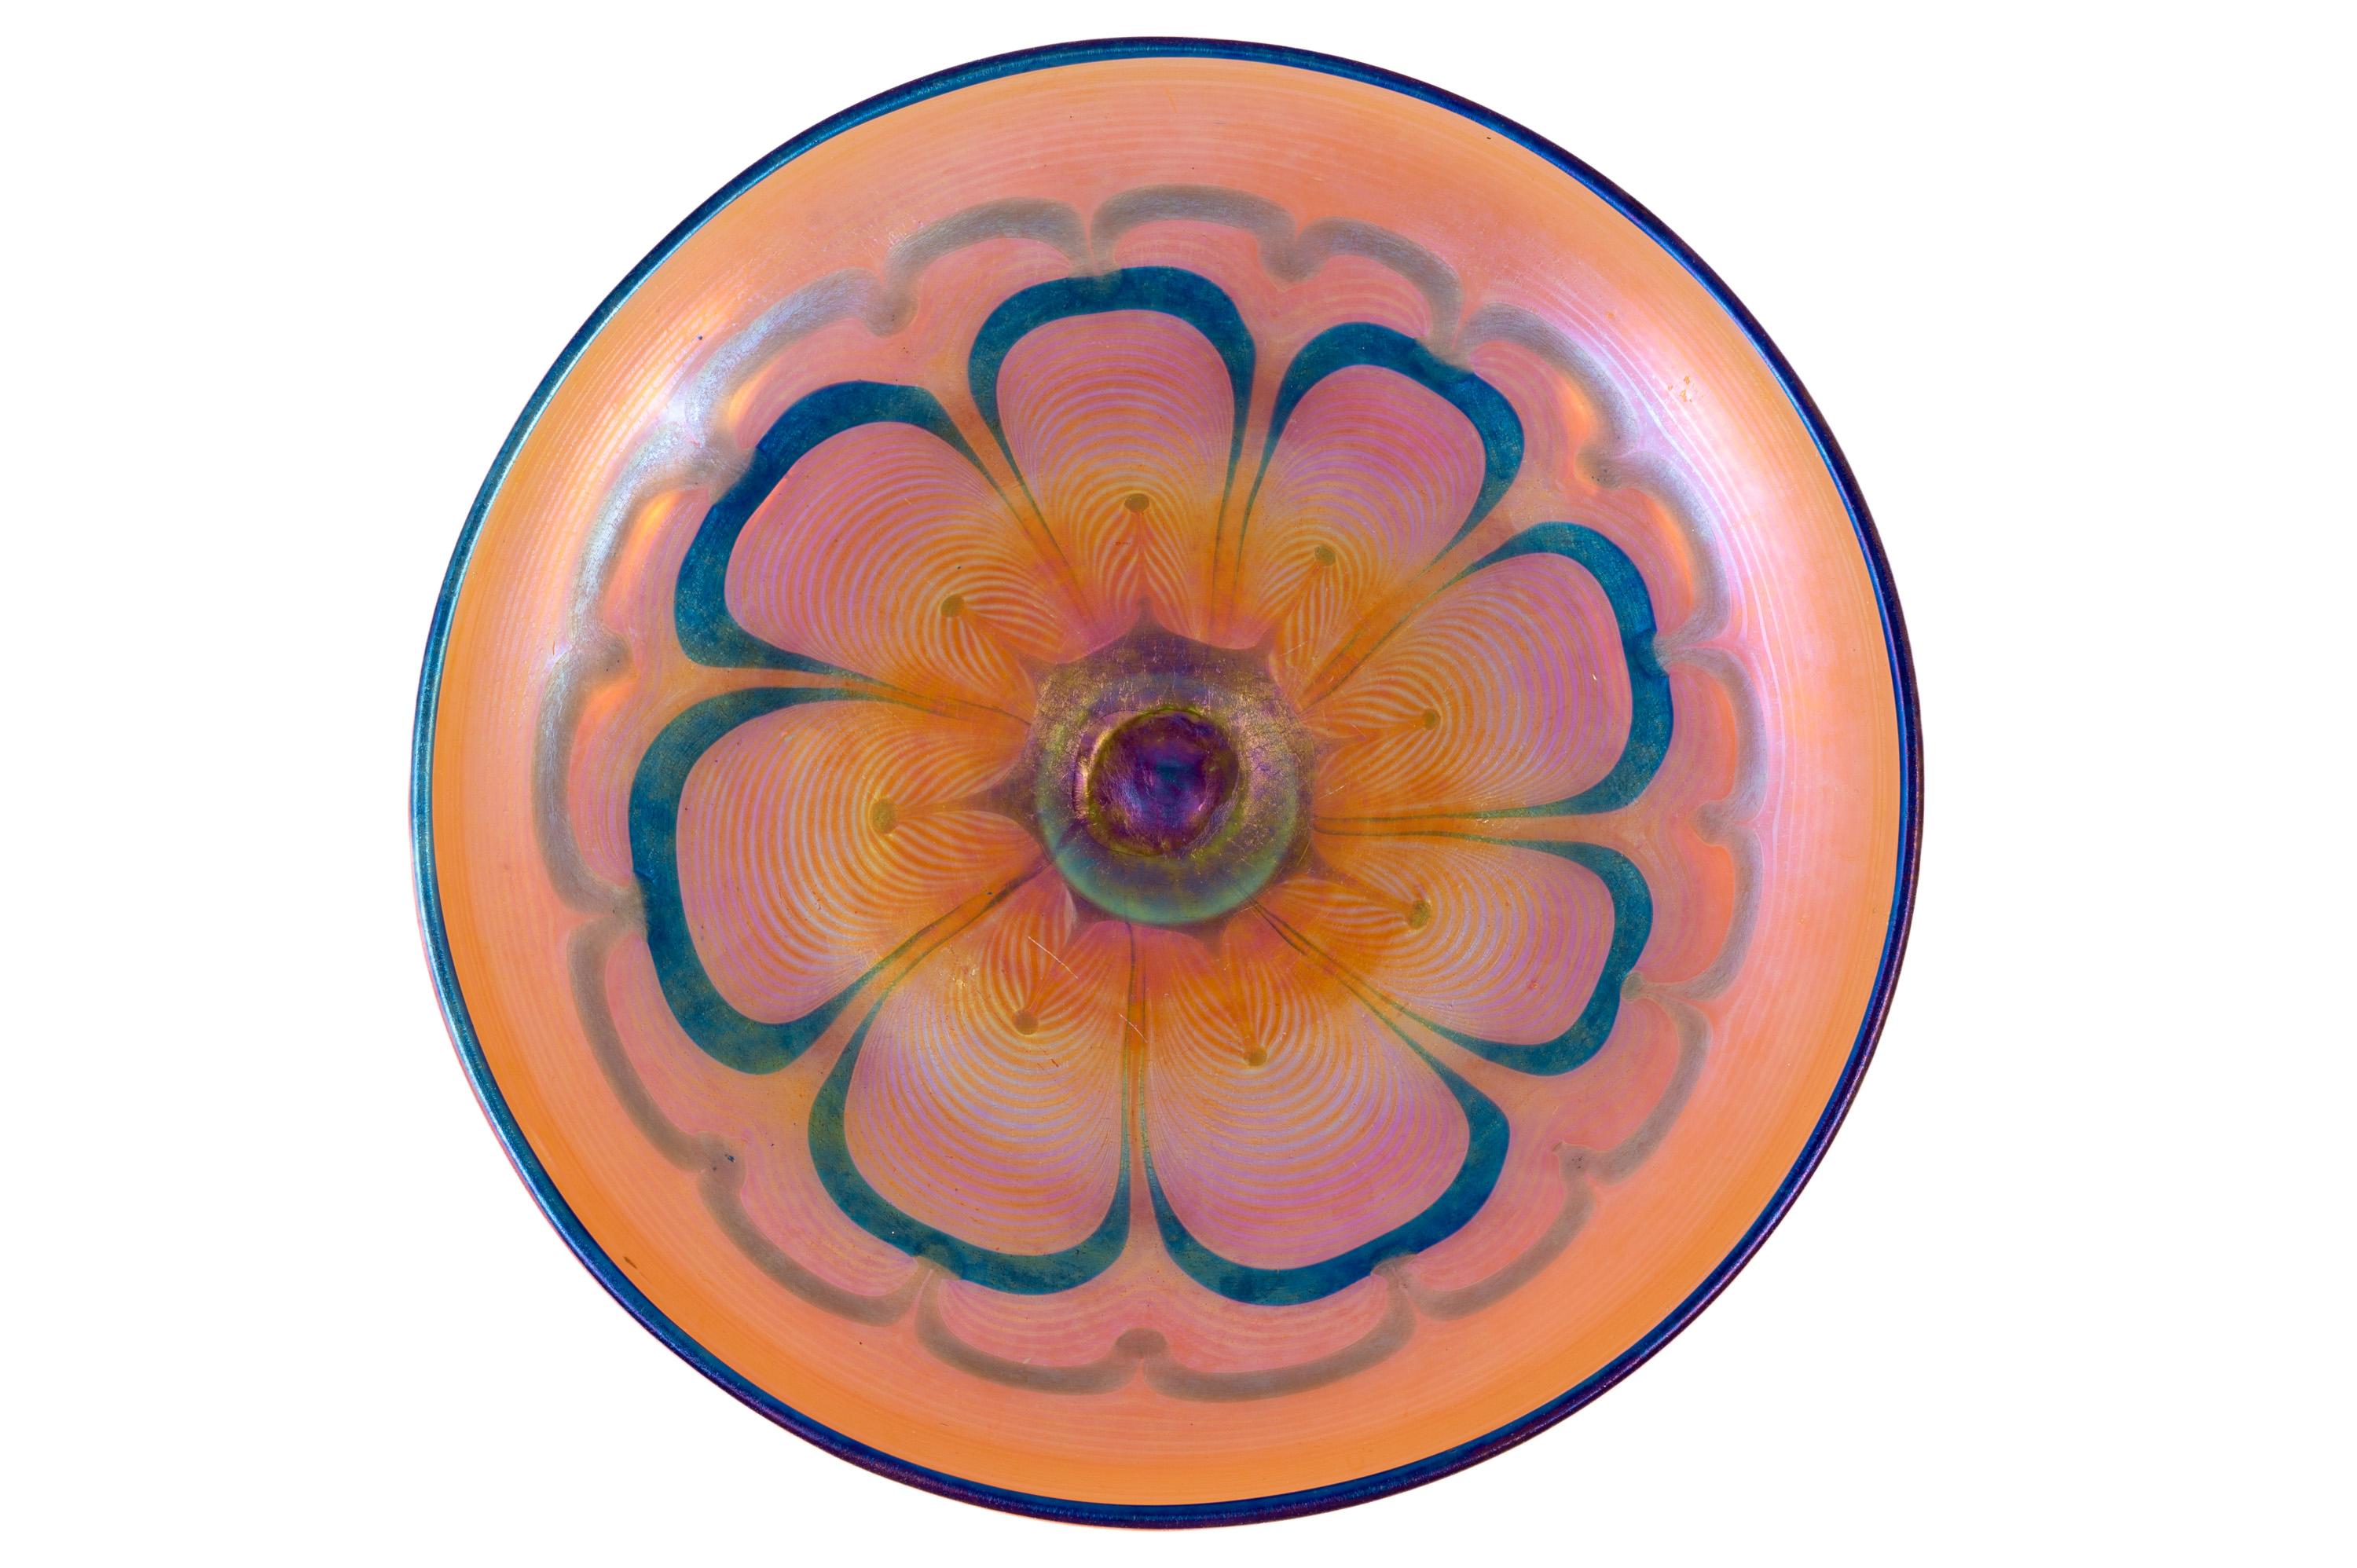 Austrian Jugendstil glass plate manufactured by Johann Loetz Witwe unidentified decoration, circa 1900
A special feature of the production line for the World Exhibition in Paris in 1900 were the designs of plates. With these objects, Loetz was not